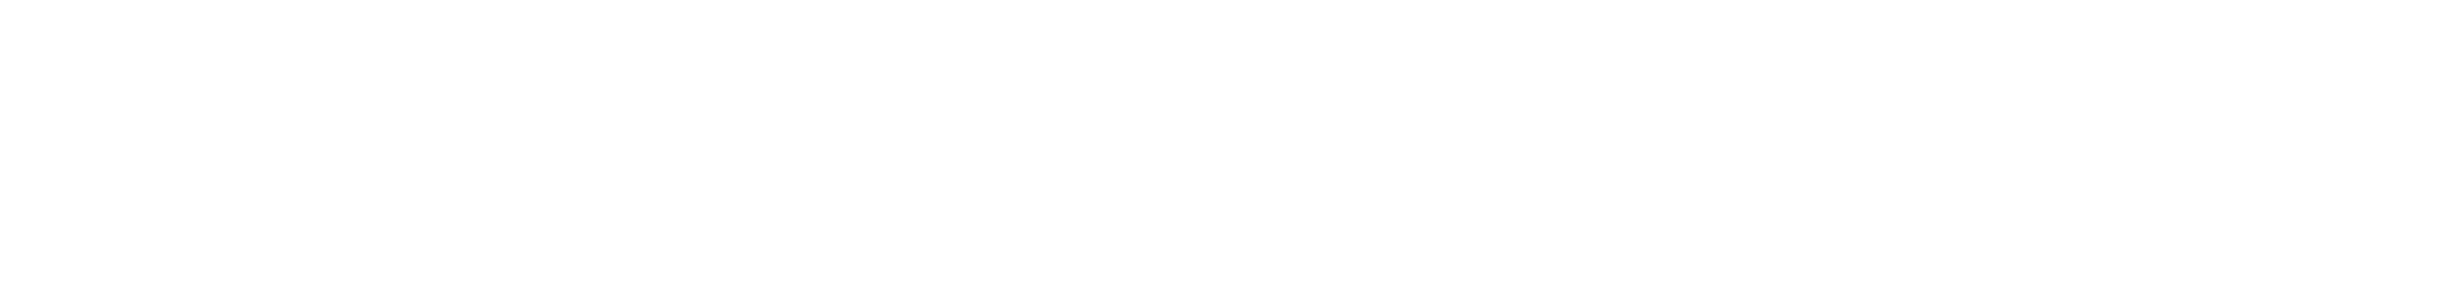 Professionally managed by SRG Residential